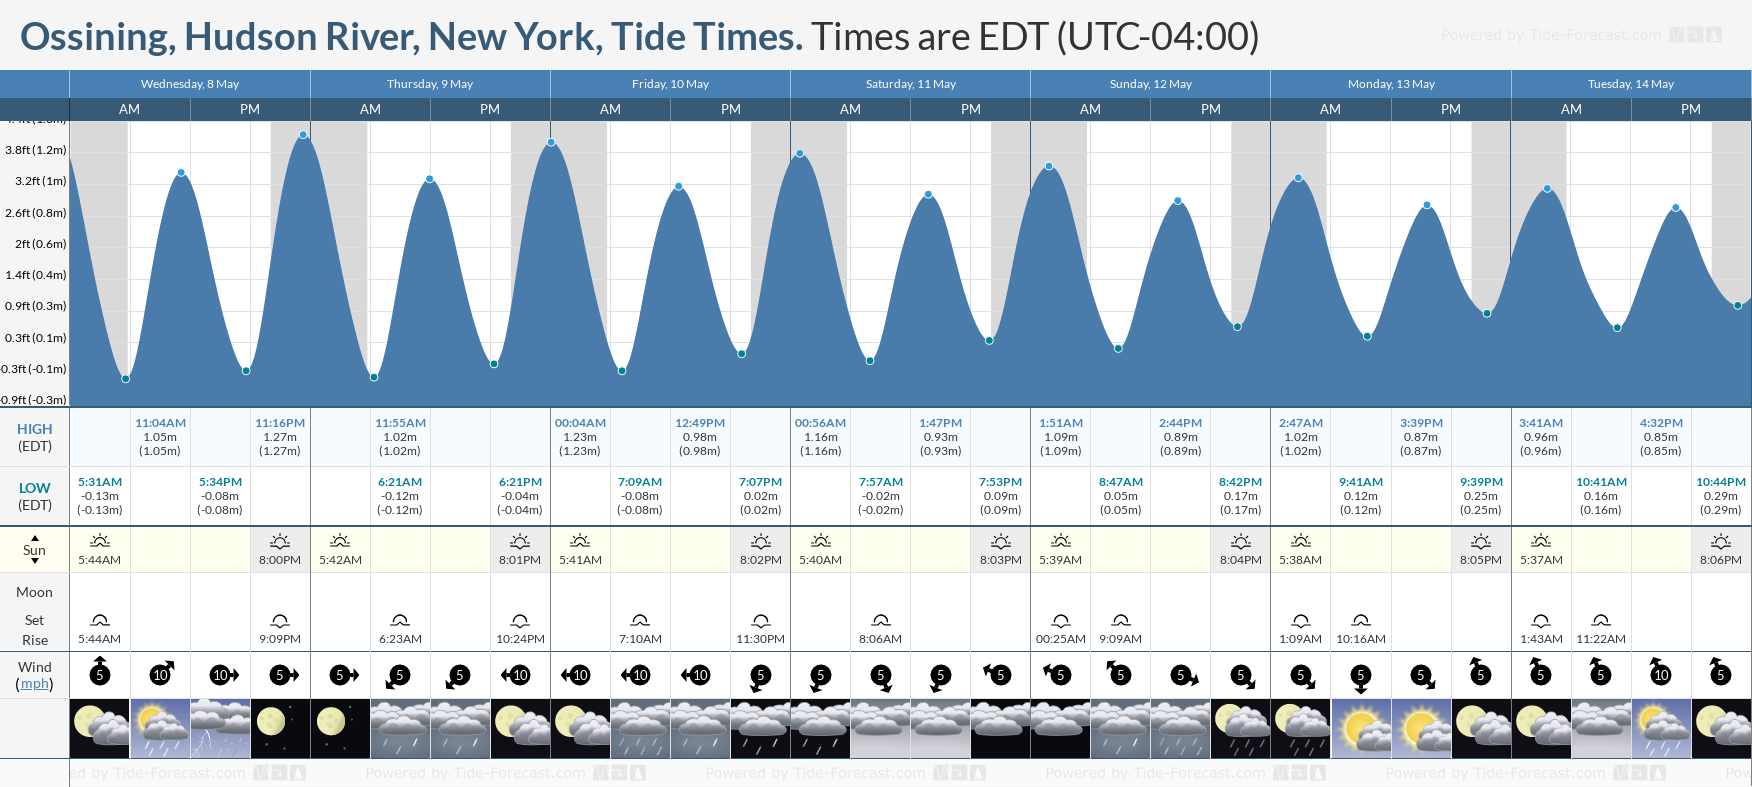 Ossining, Hudson River, New York Tide Chart including high and low tide times for the next 7 days